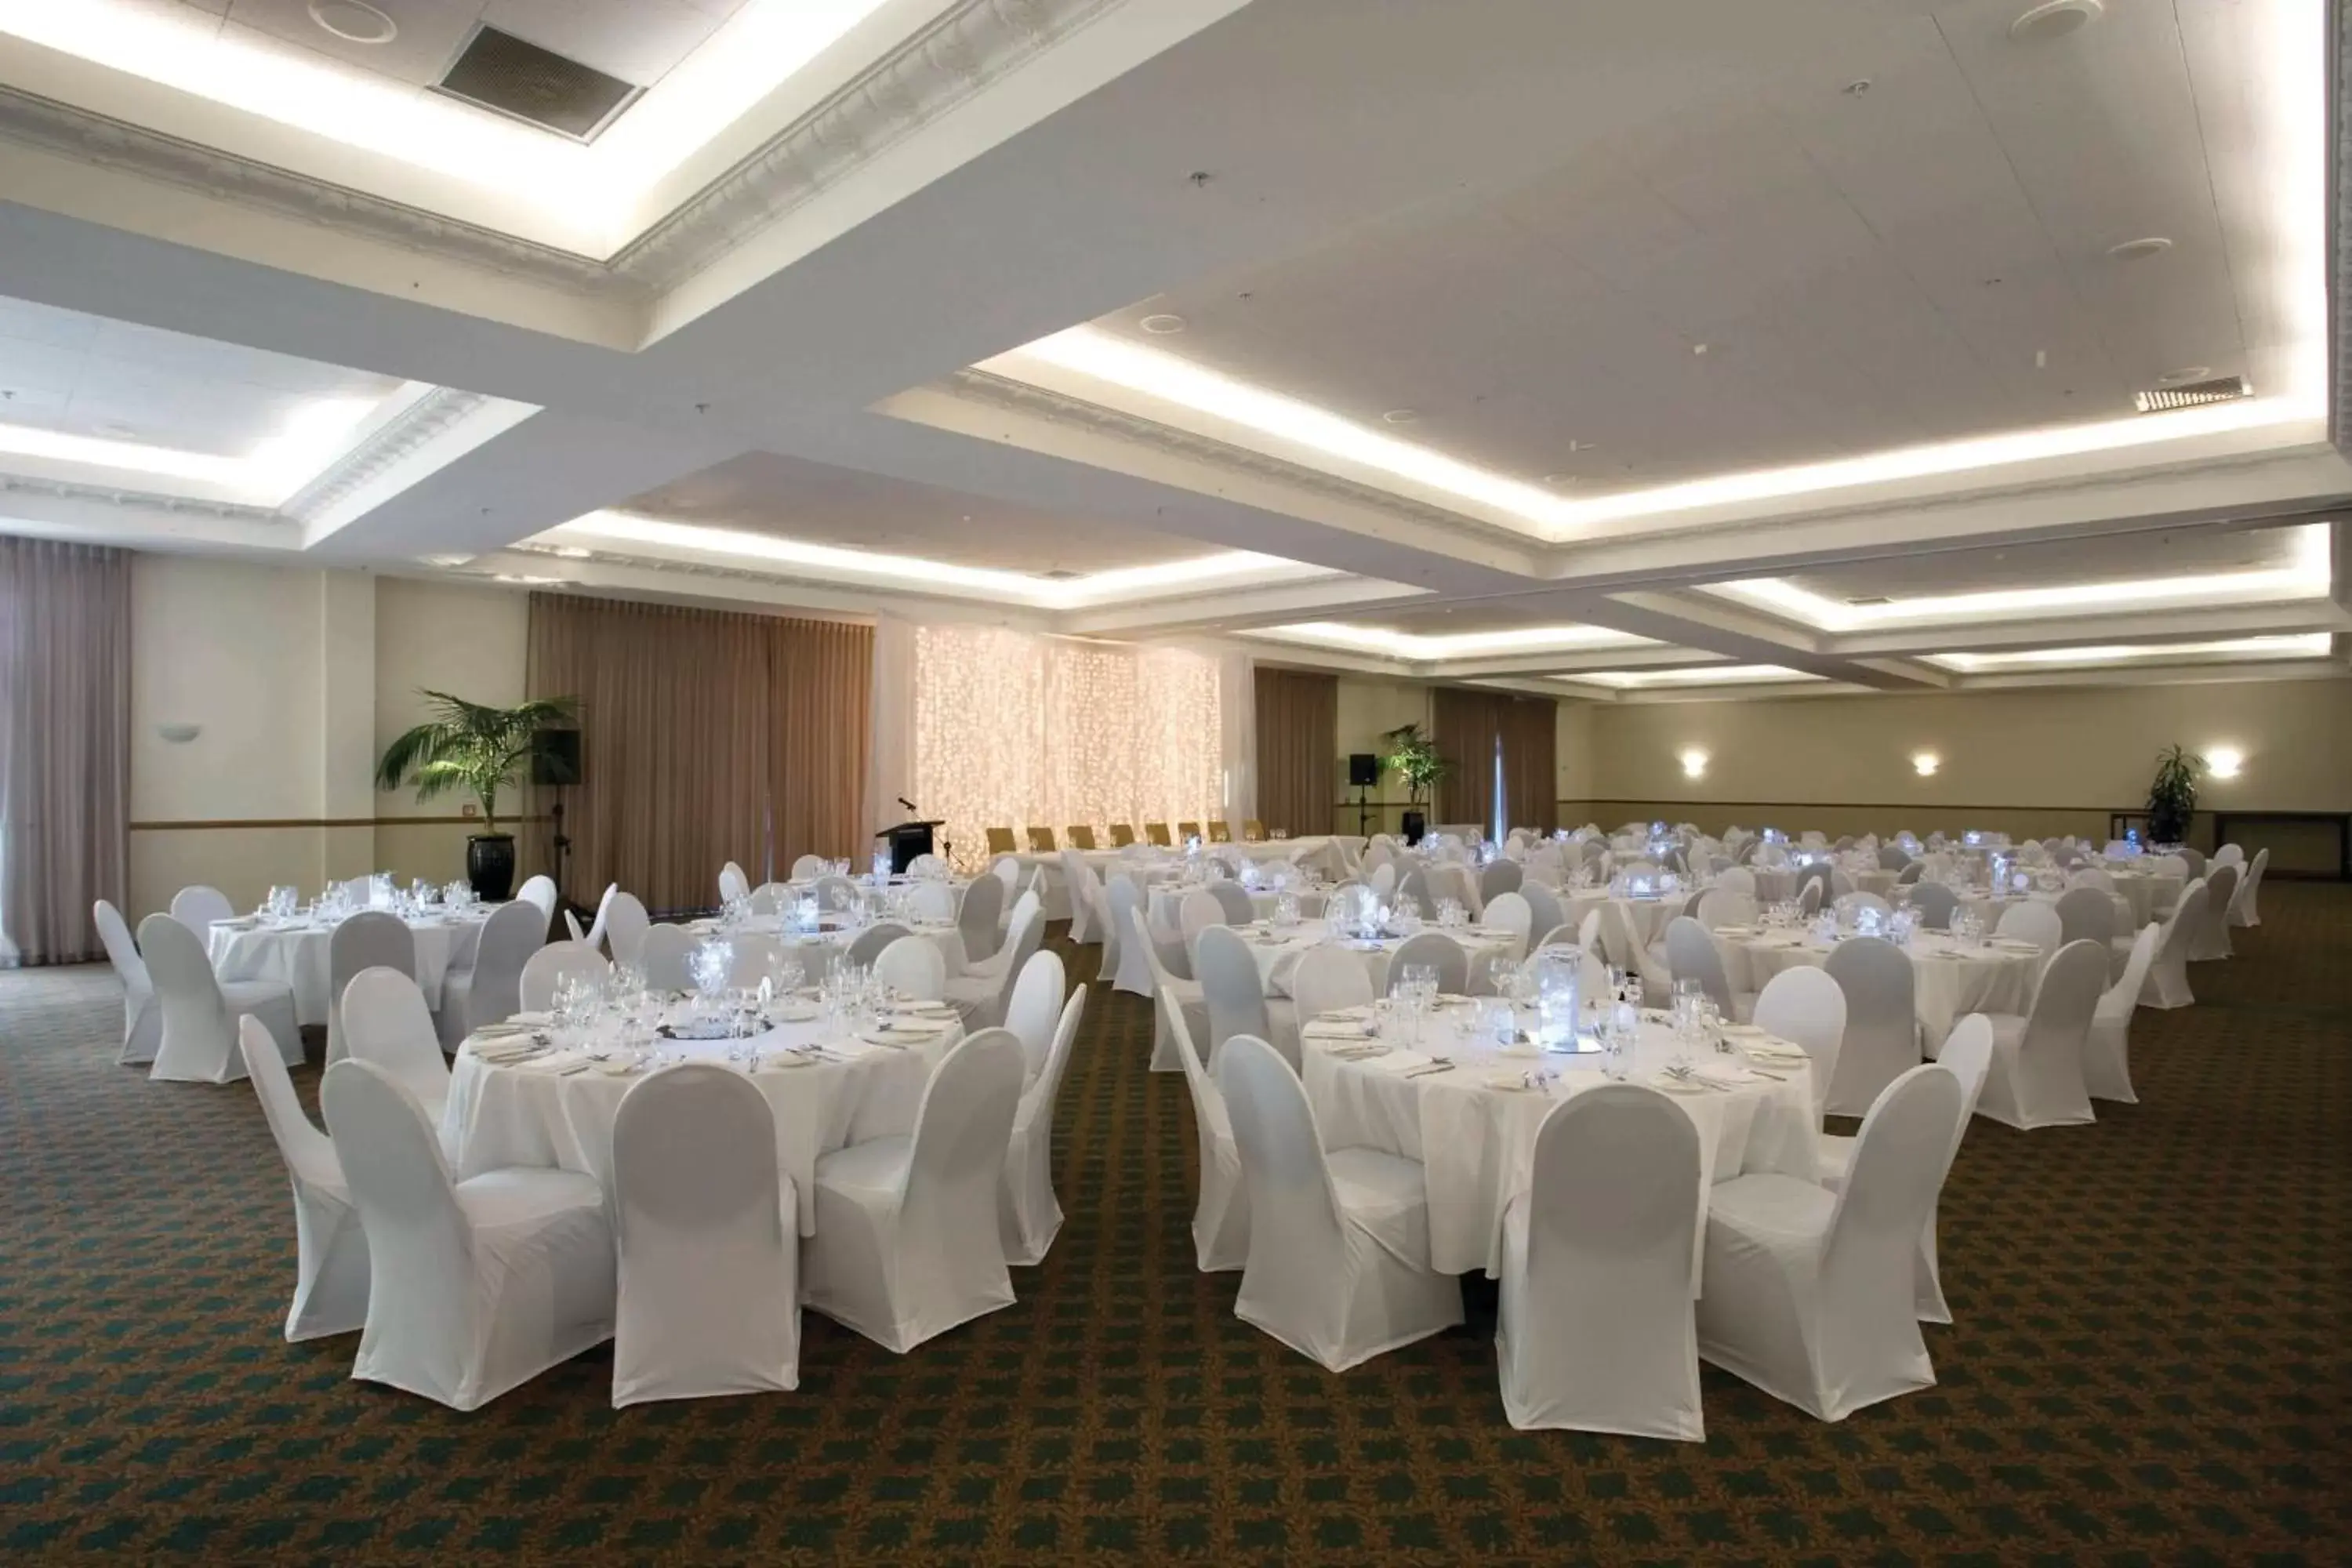 Banquet/Function facilities, Banquet Facilities in Distinction Palmerston North Hotel & Conference Centre